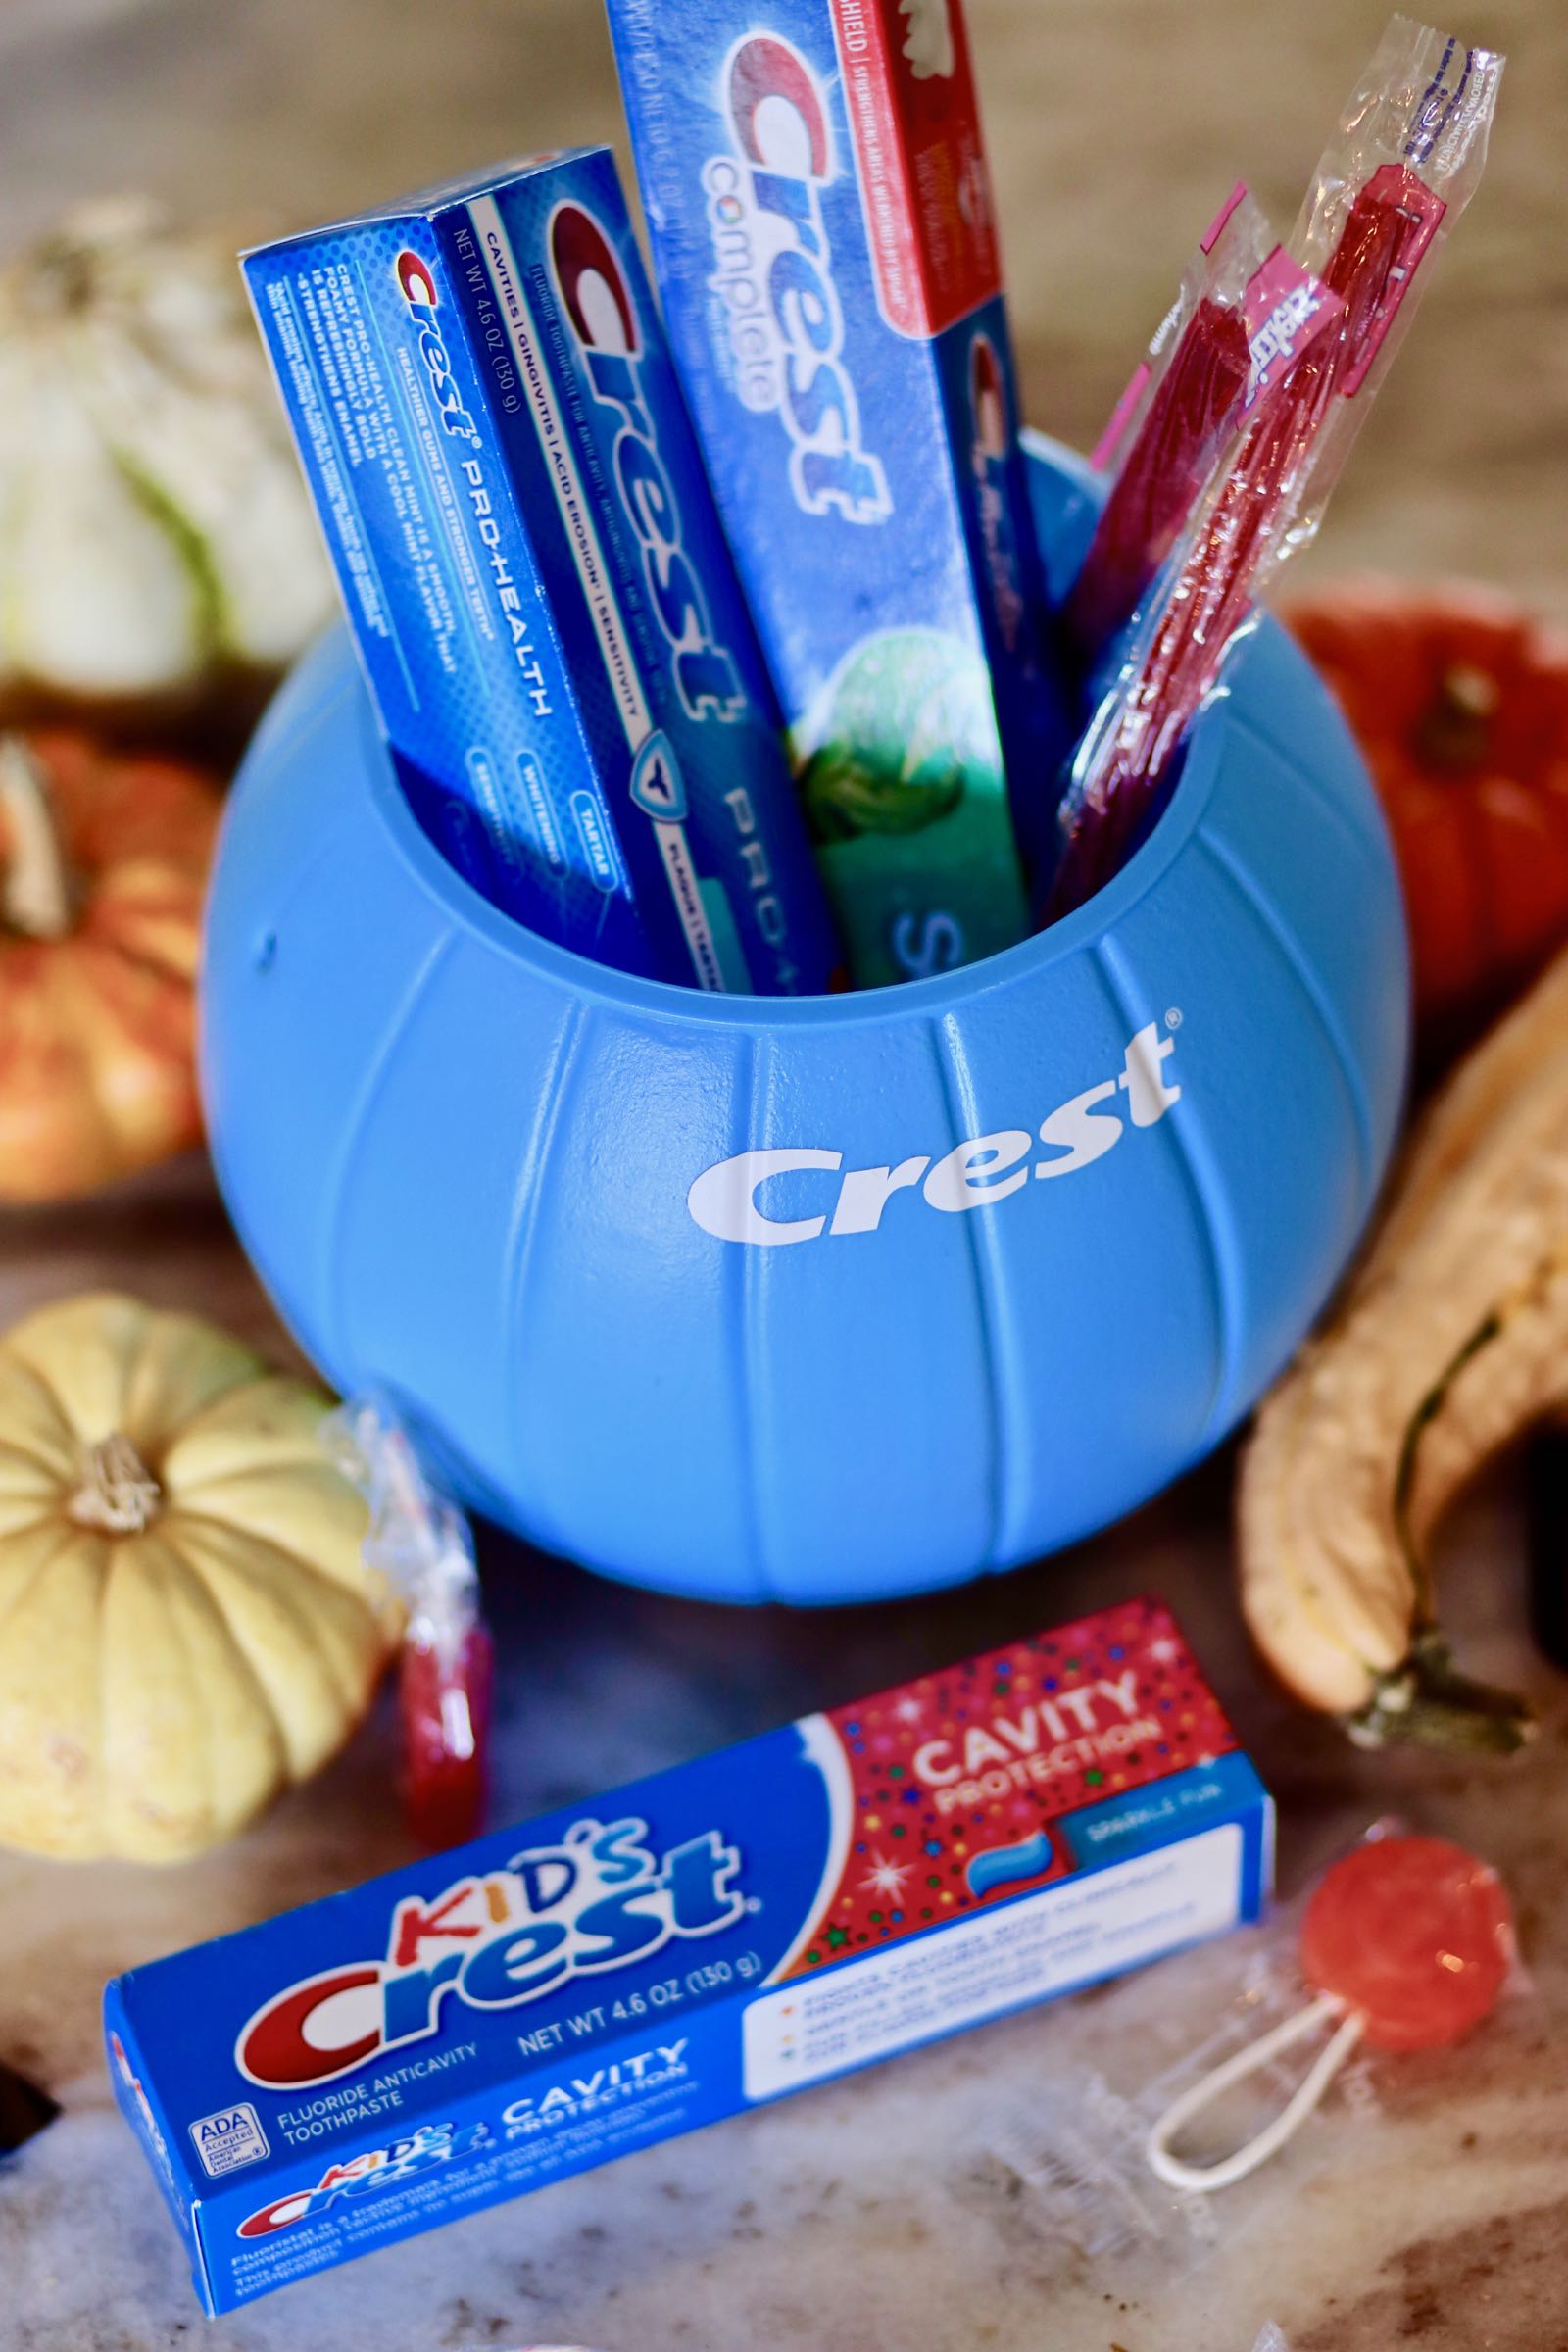 Get your coupon for Crest toothpaste at Target!